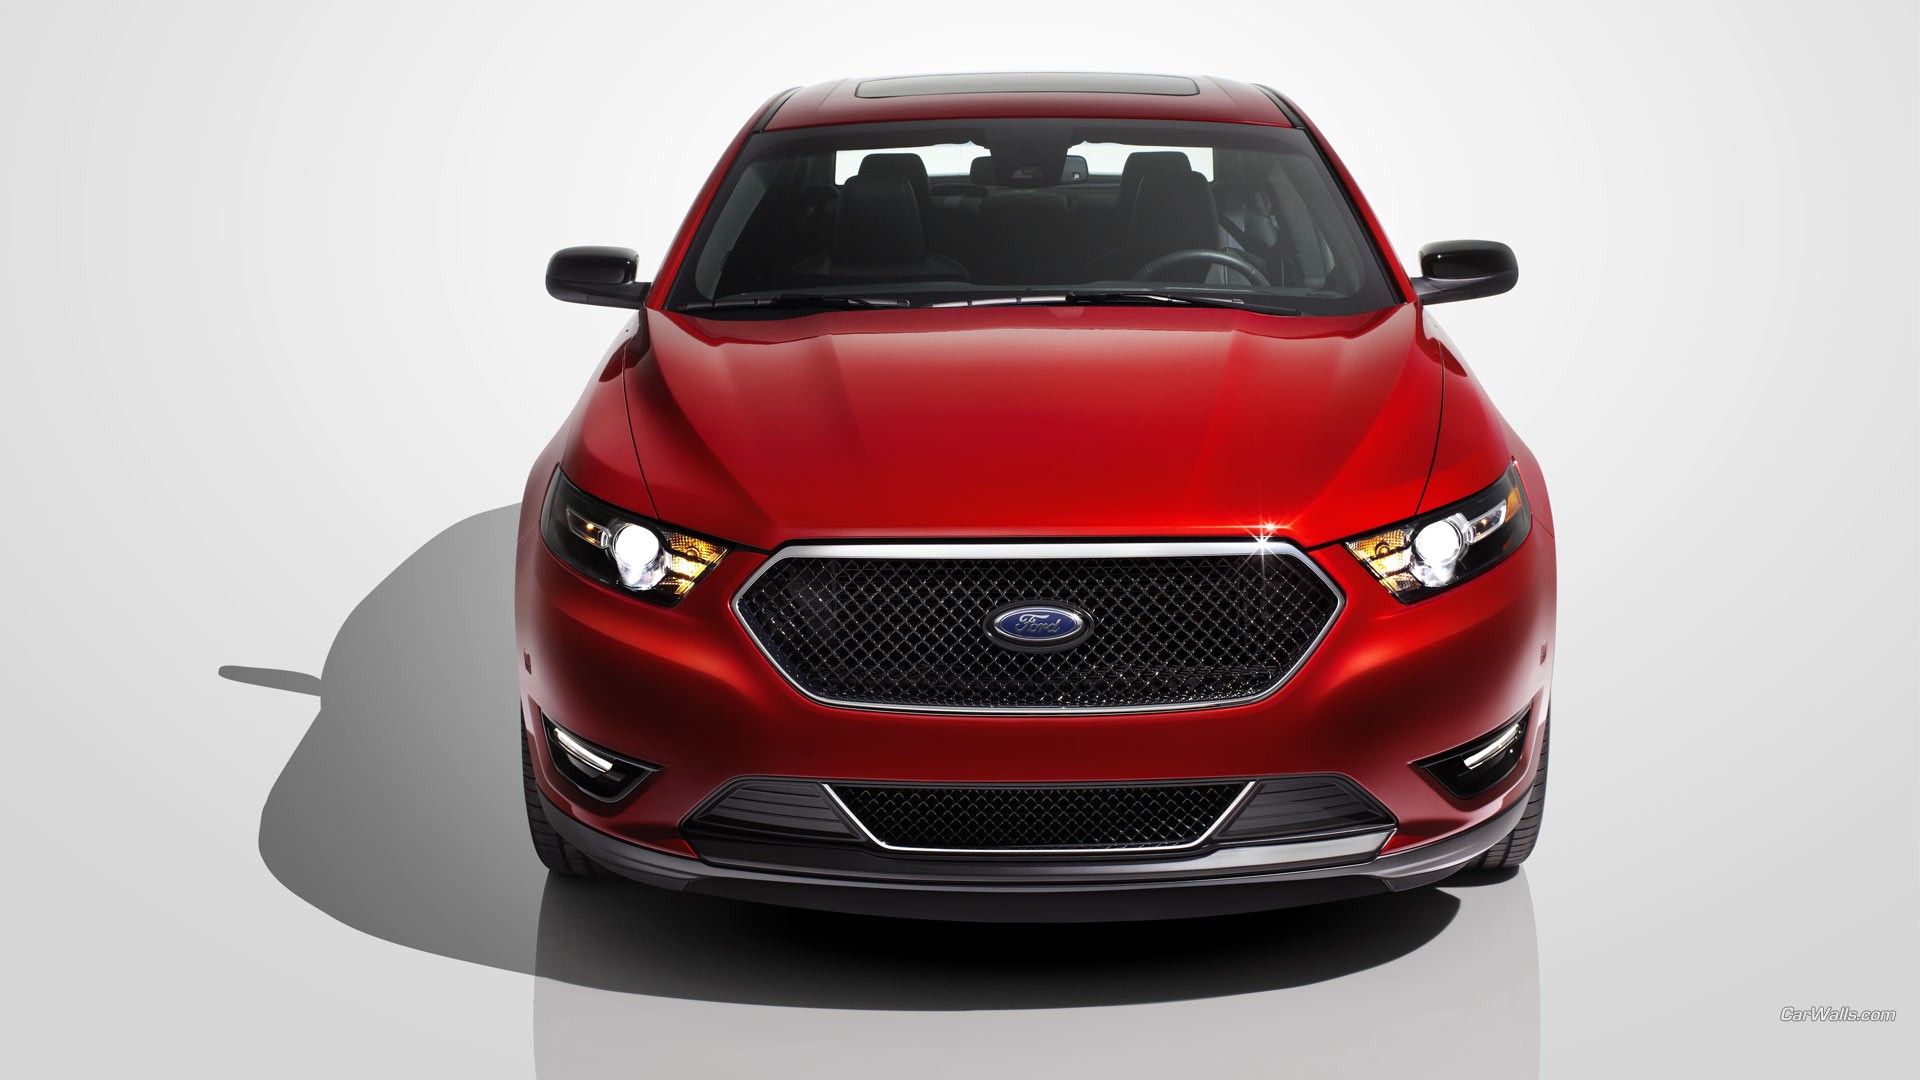 General 1920x1080 Ford Taurus Ford car vehicle red cars frontal view Sedan American cars